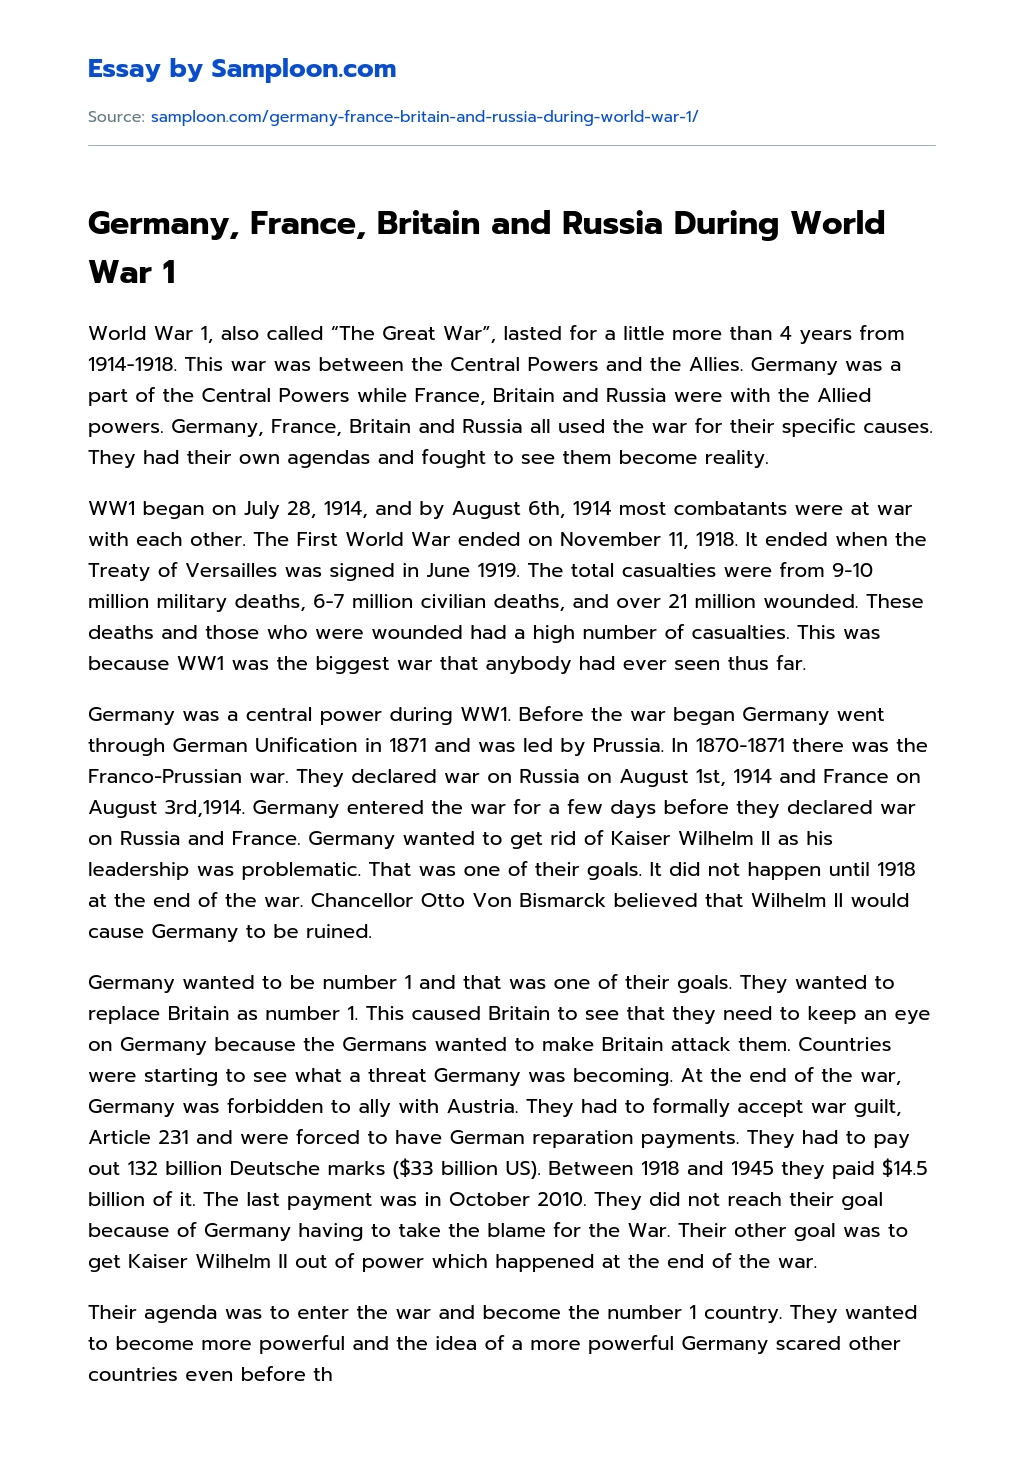 Germany, France, Britain and Russia During World War 1 essay